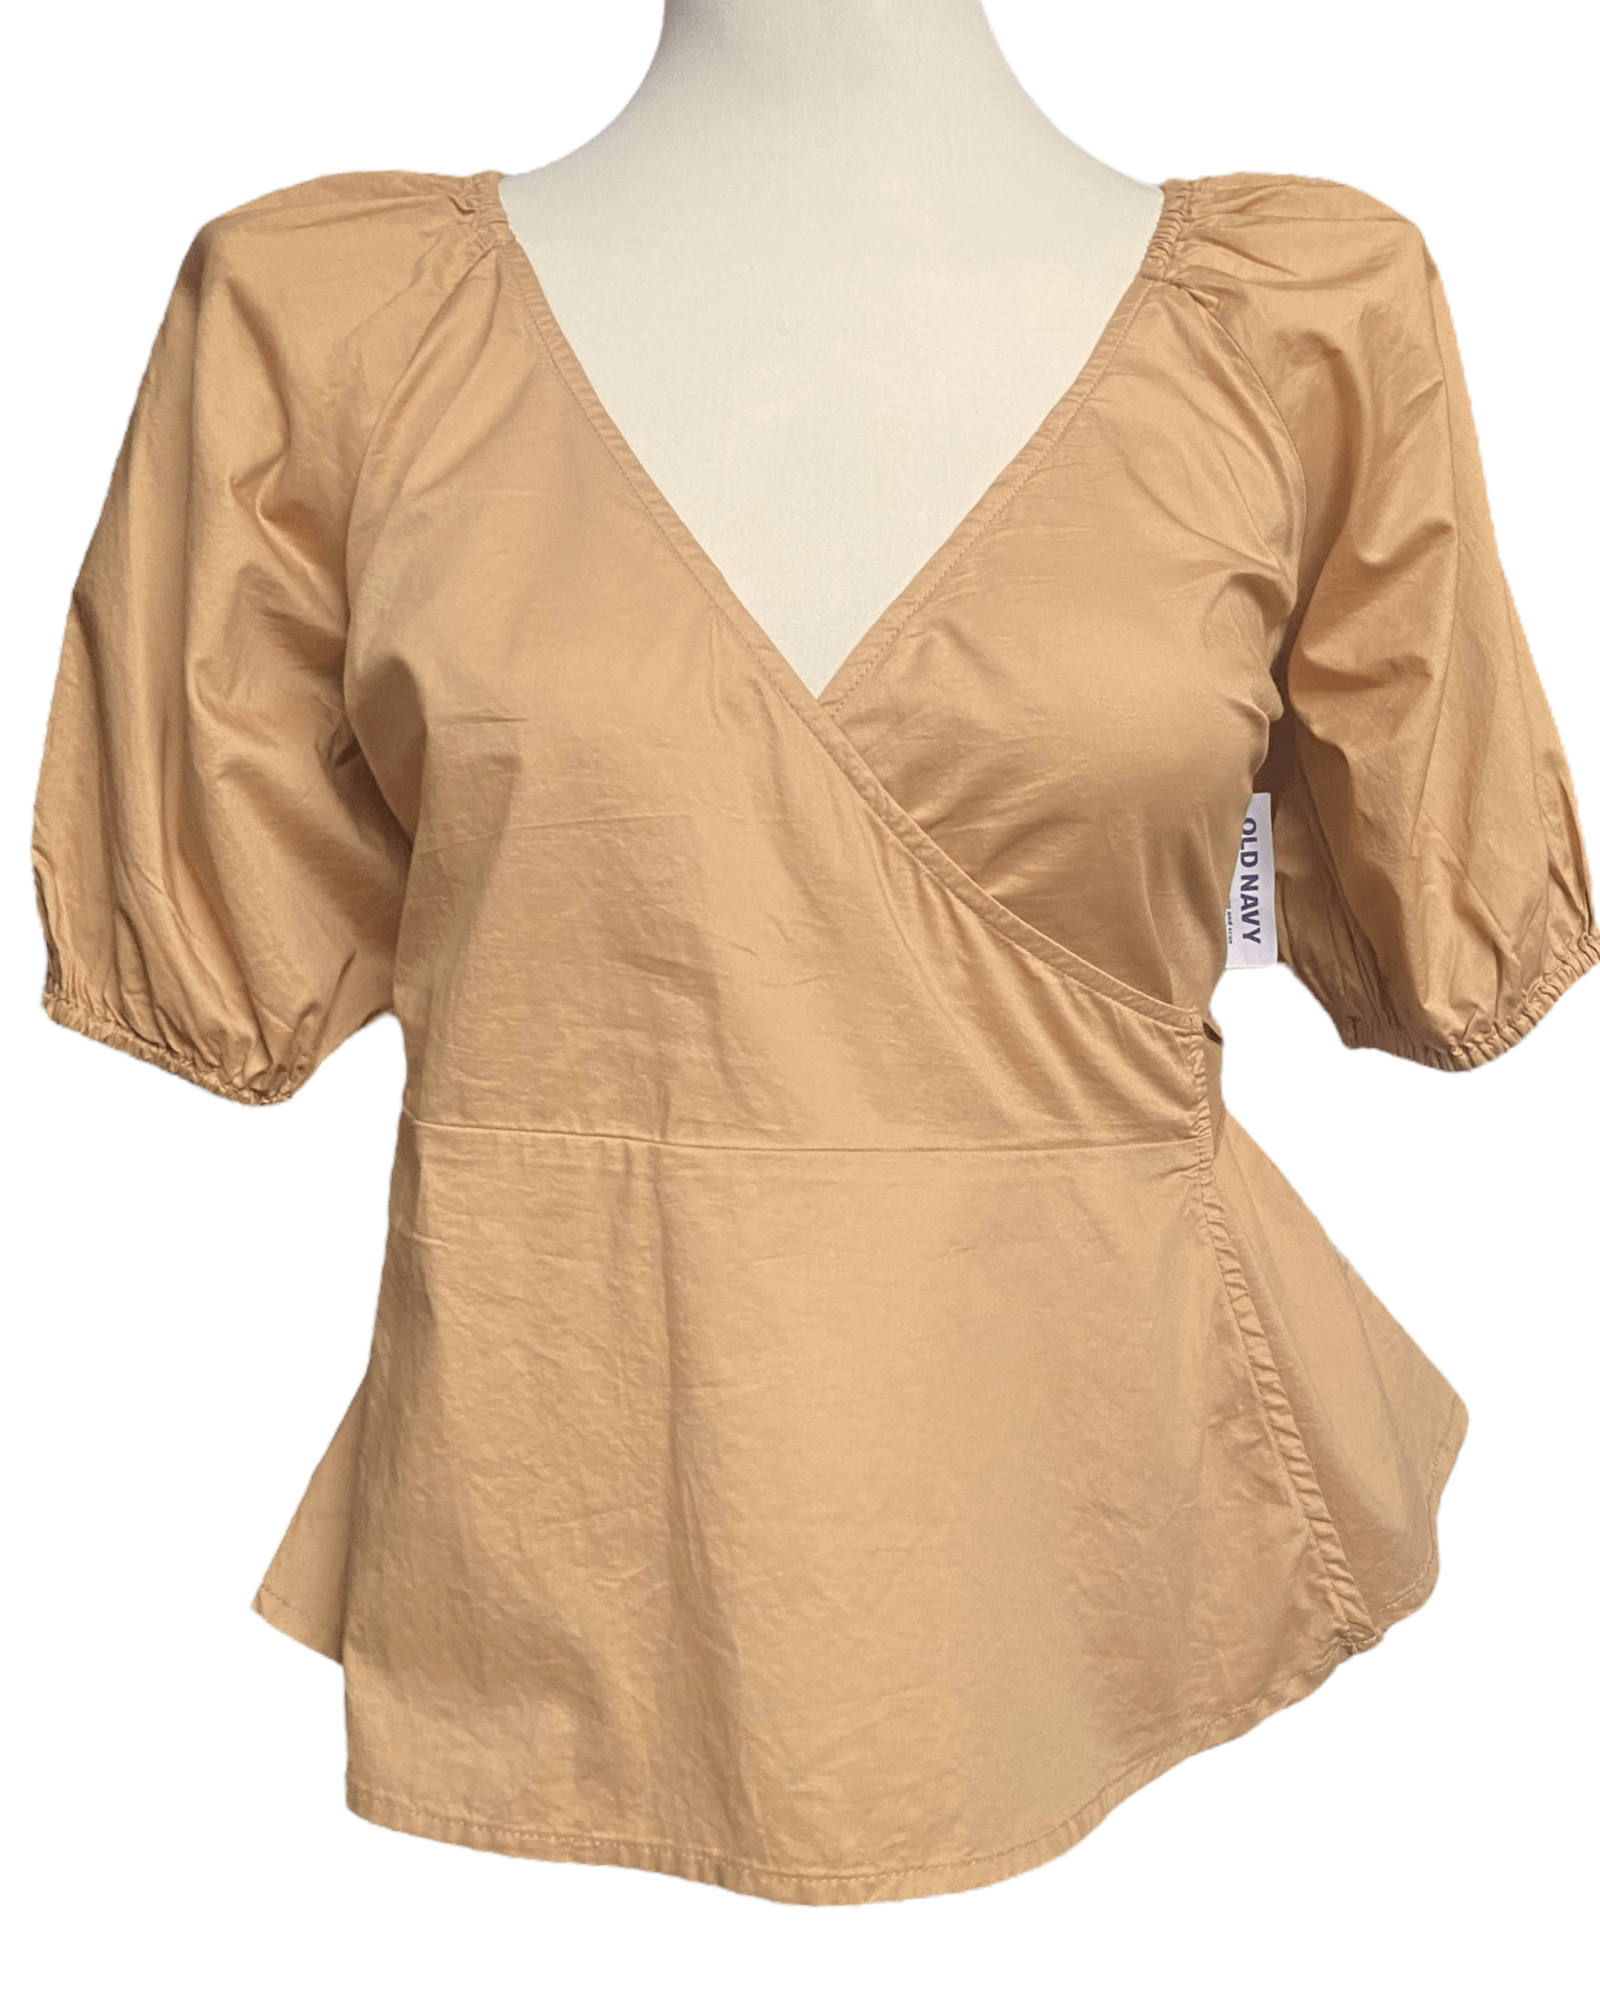 Warm Spring OLD NAVY caramel brown puff sleeve wrap top